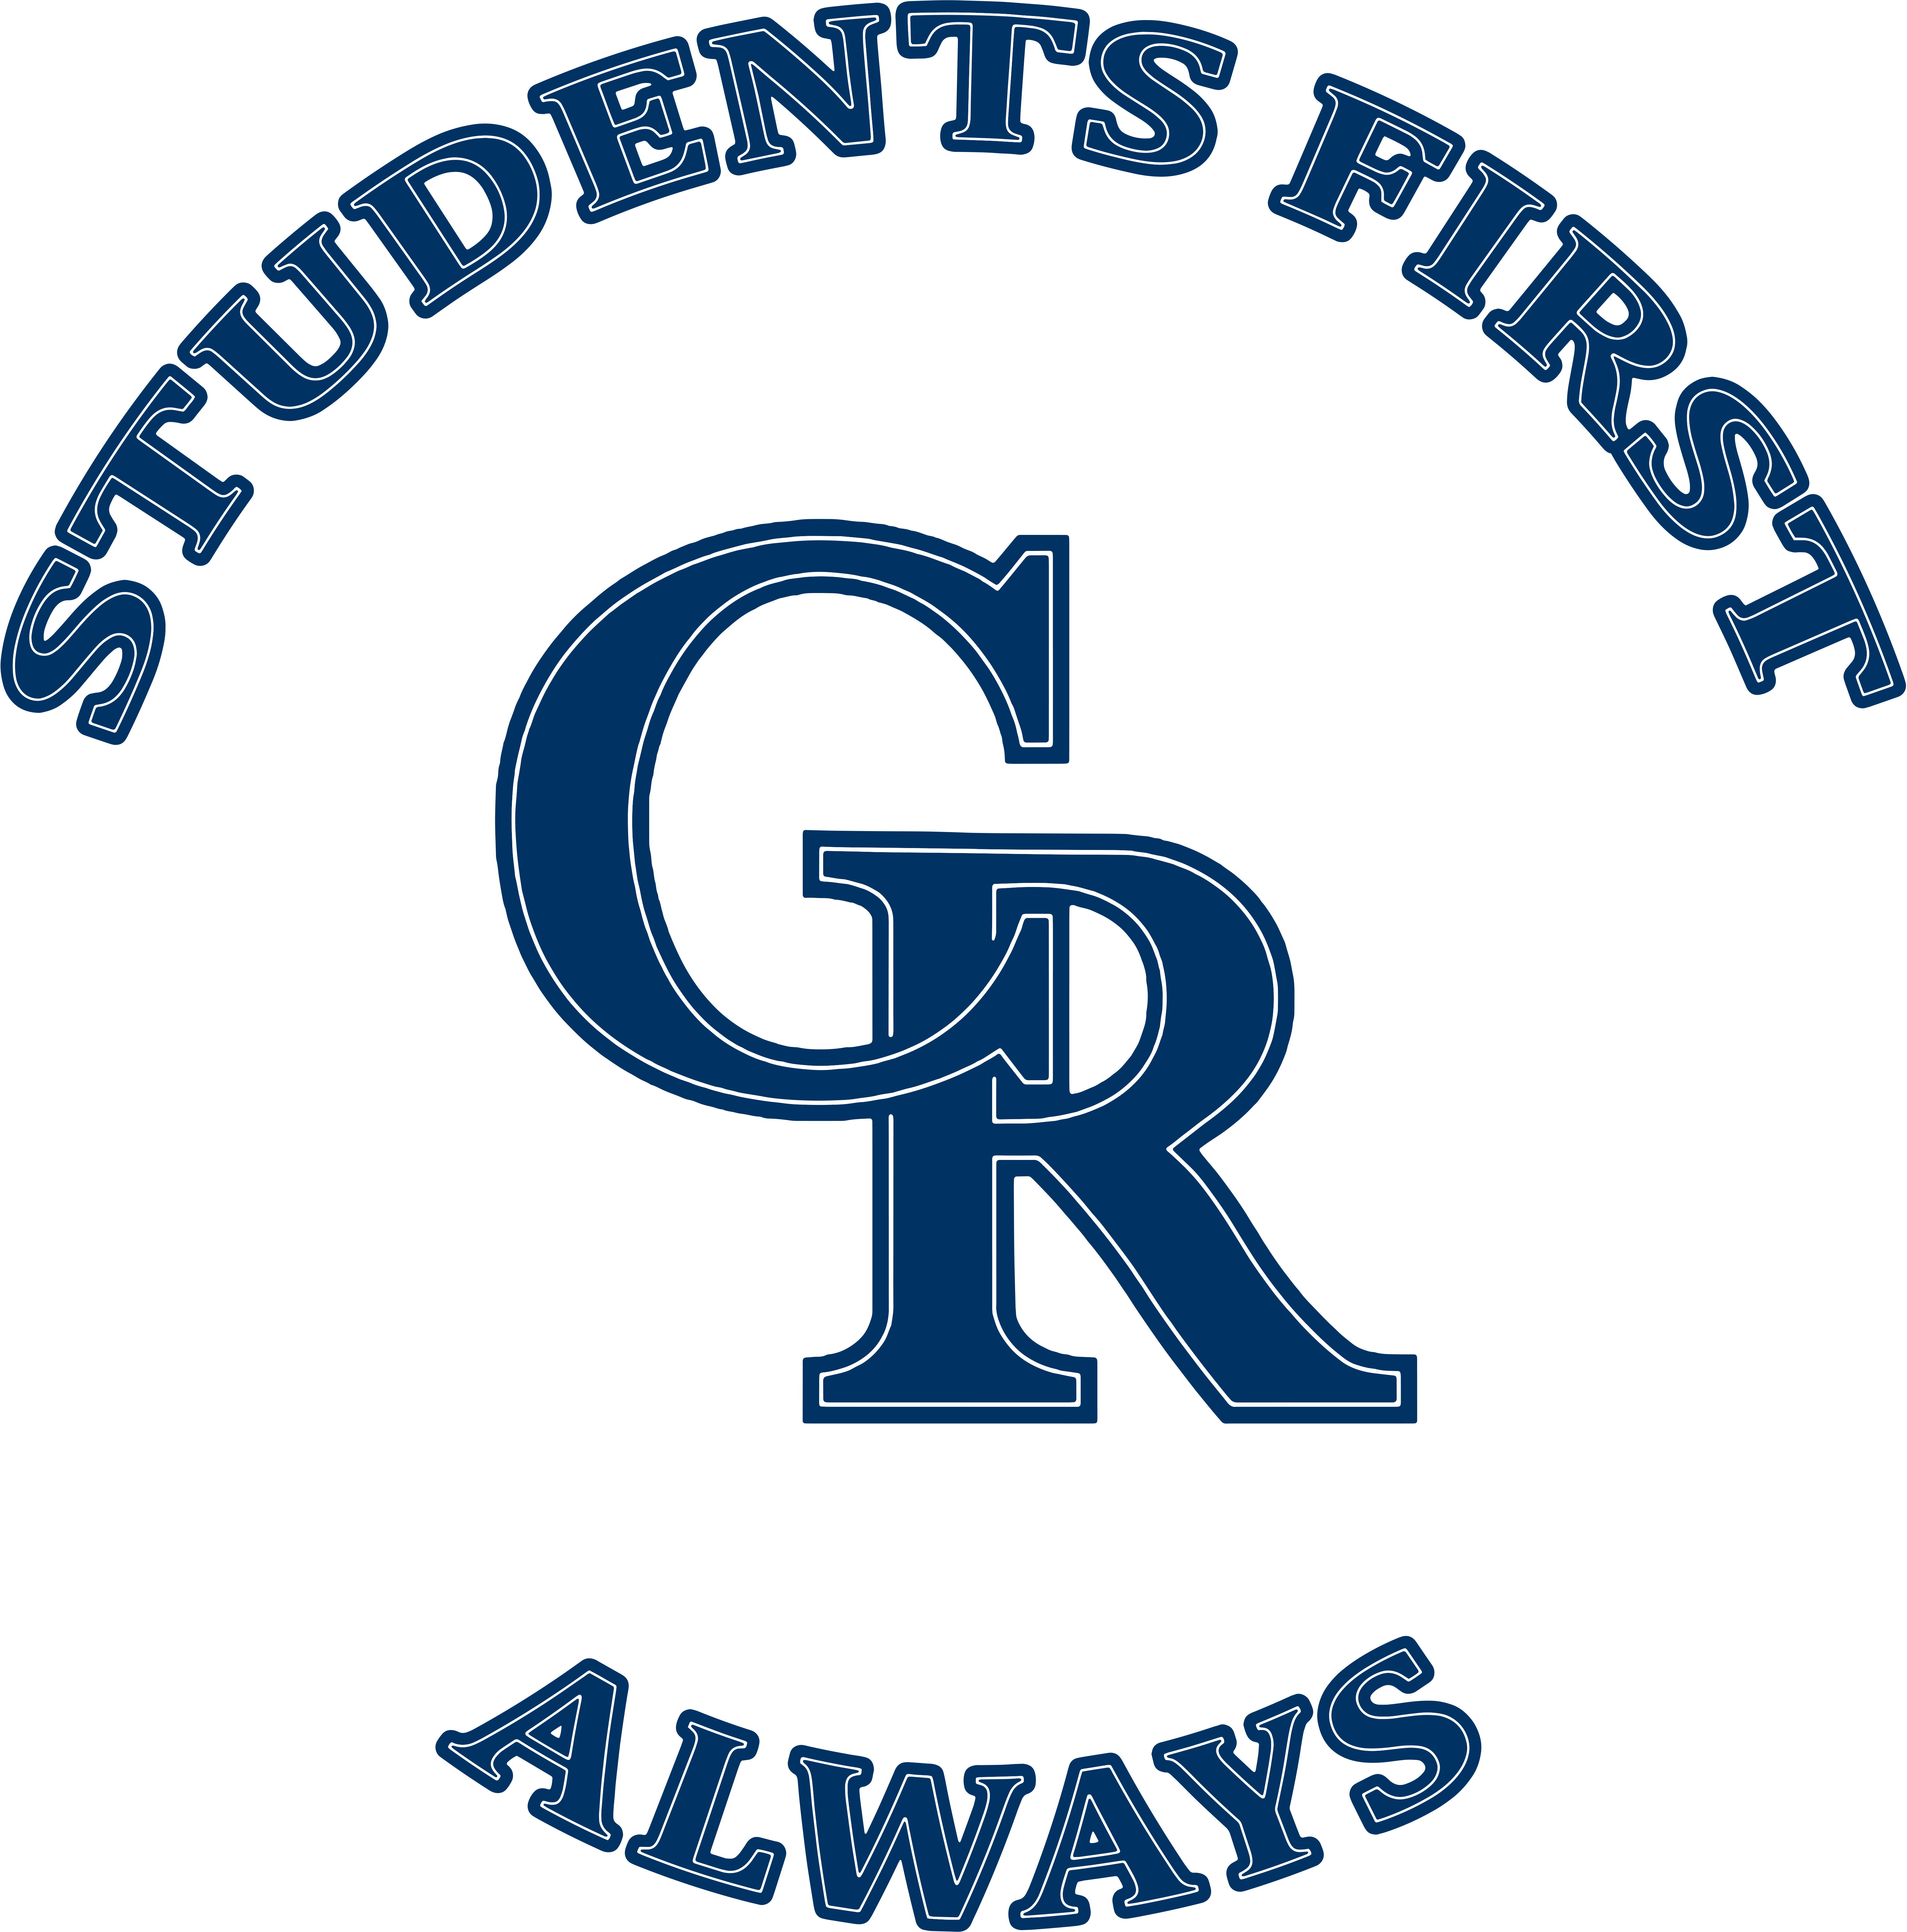 Students First Always with the initials CR for Council Rock